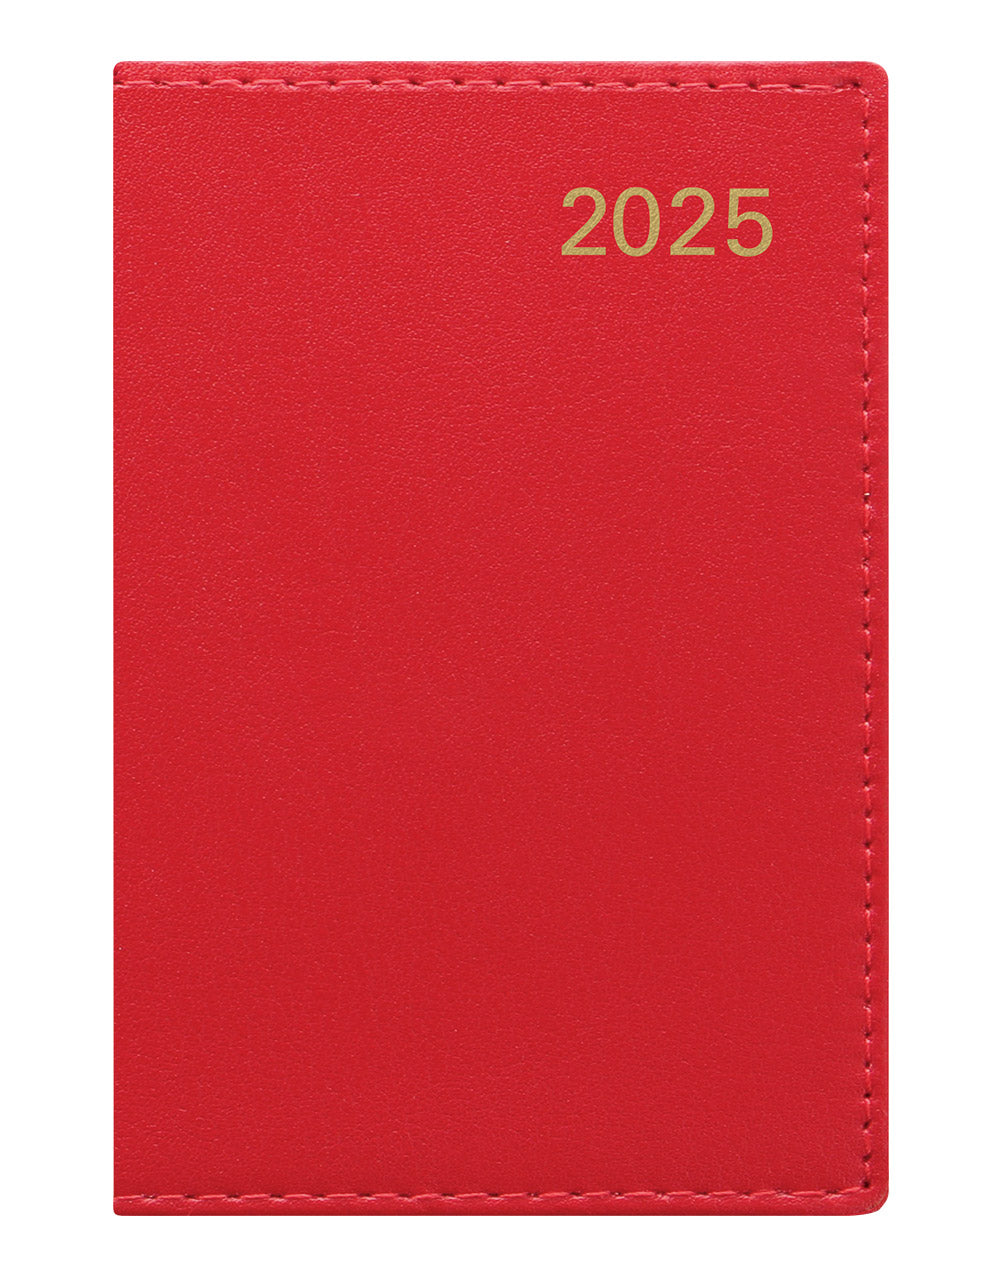 Belgravia Mini Pocket Week to View Leather Diary with Planners 2025 - English 25-C33ERD#color_red